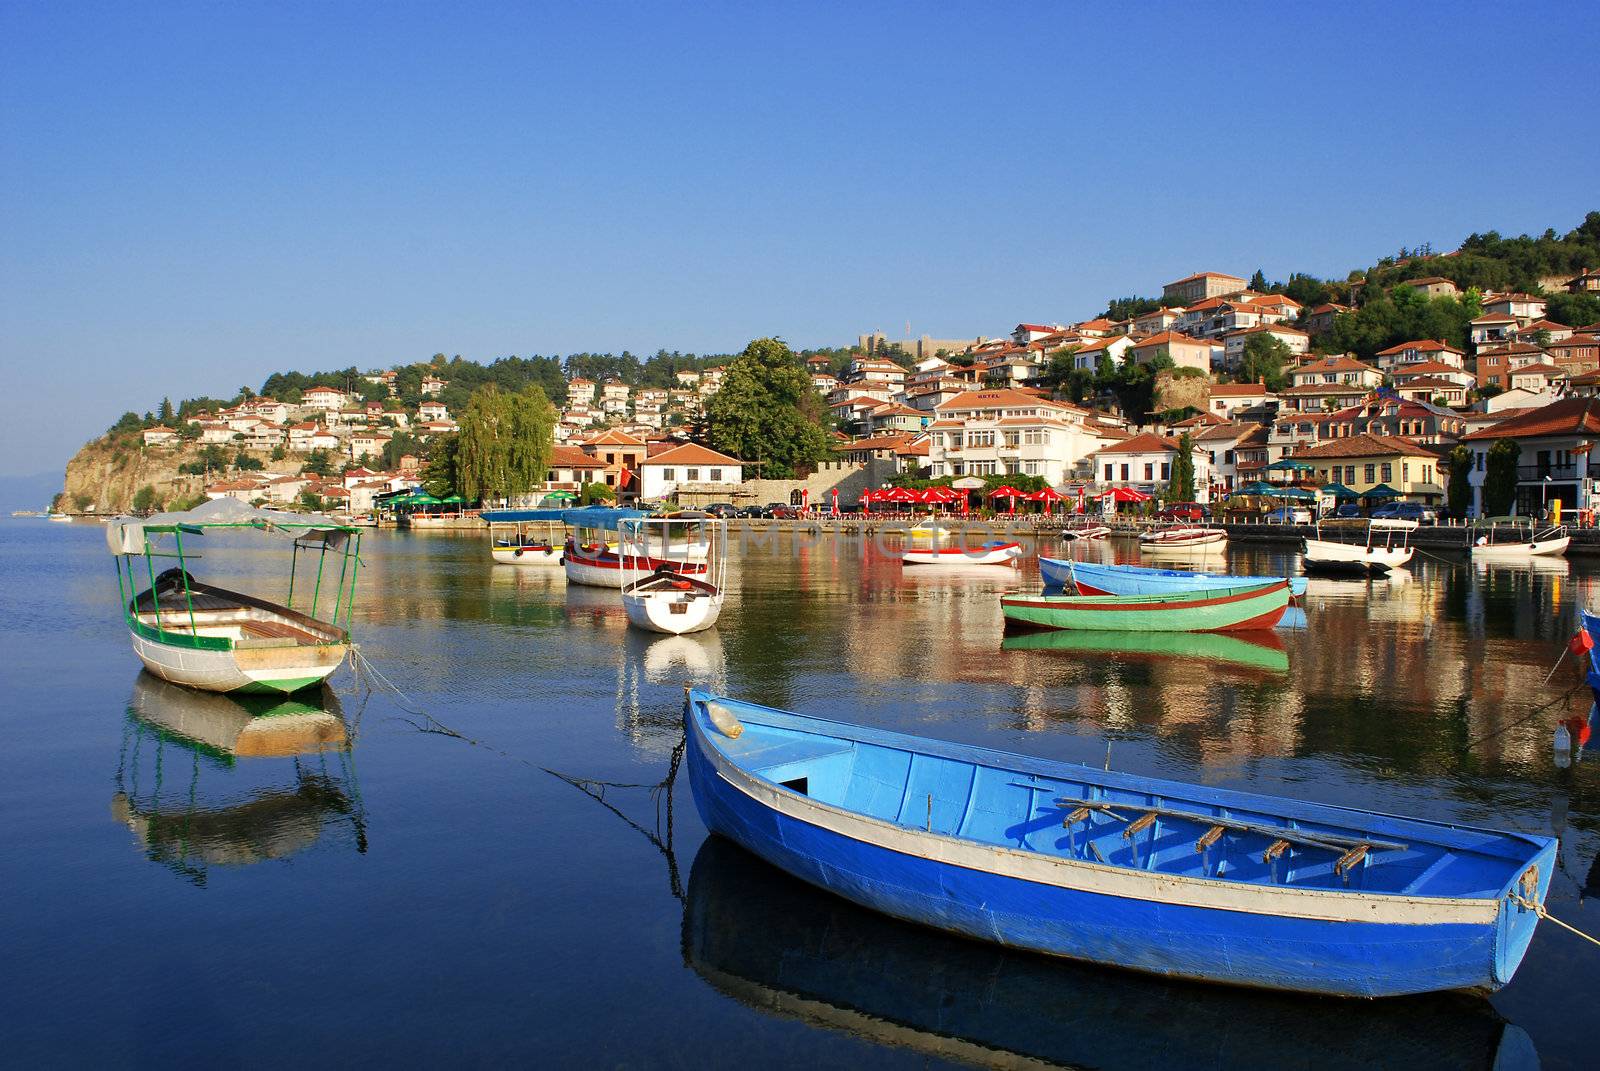 Ohrid lake. Fishing boats with the view of an old town of Ohrid in the background.